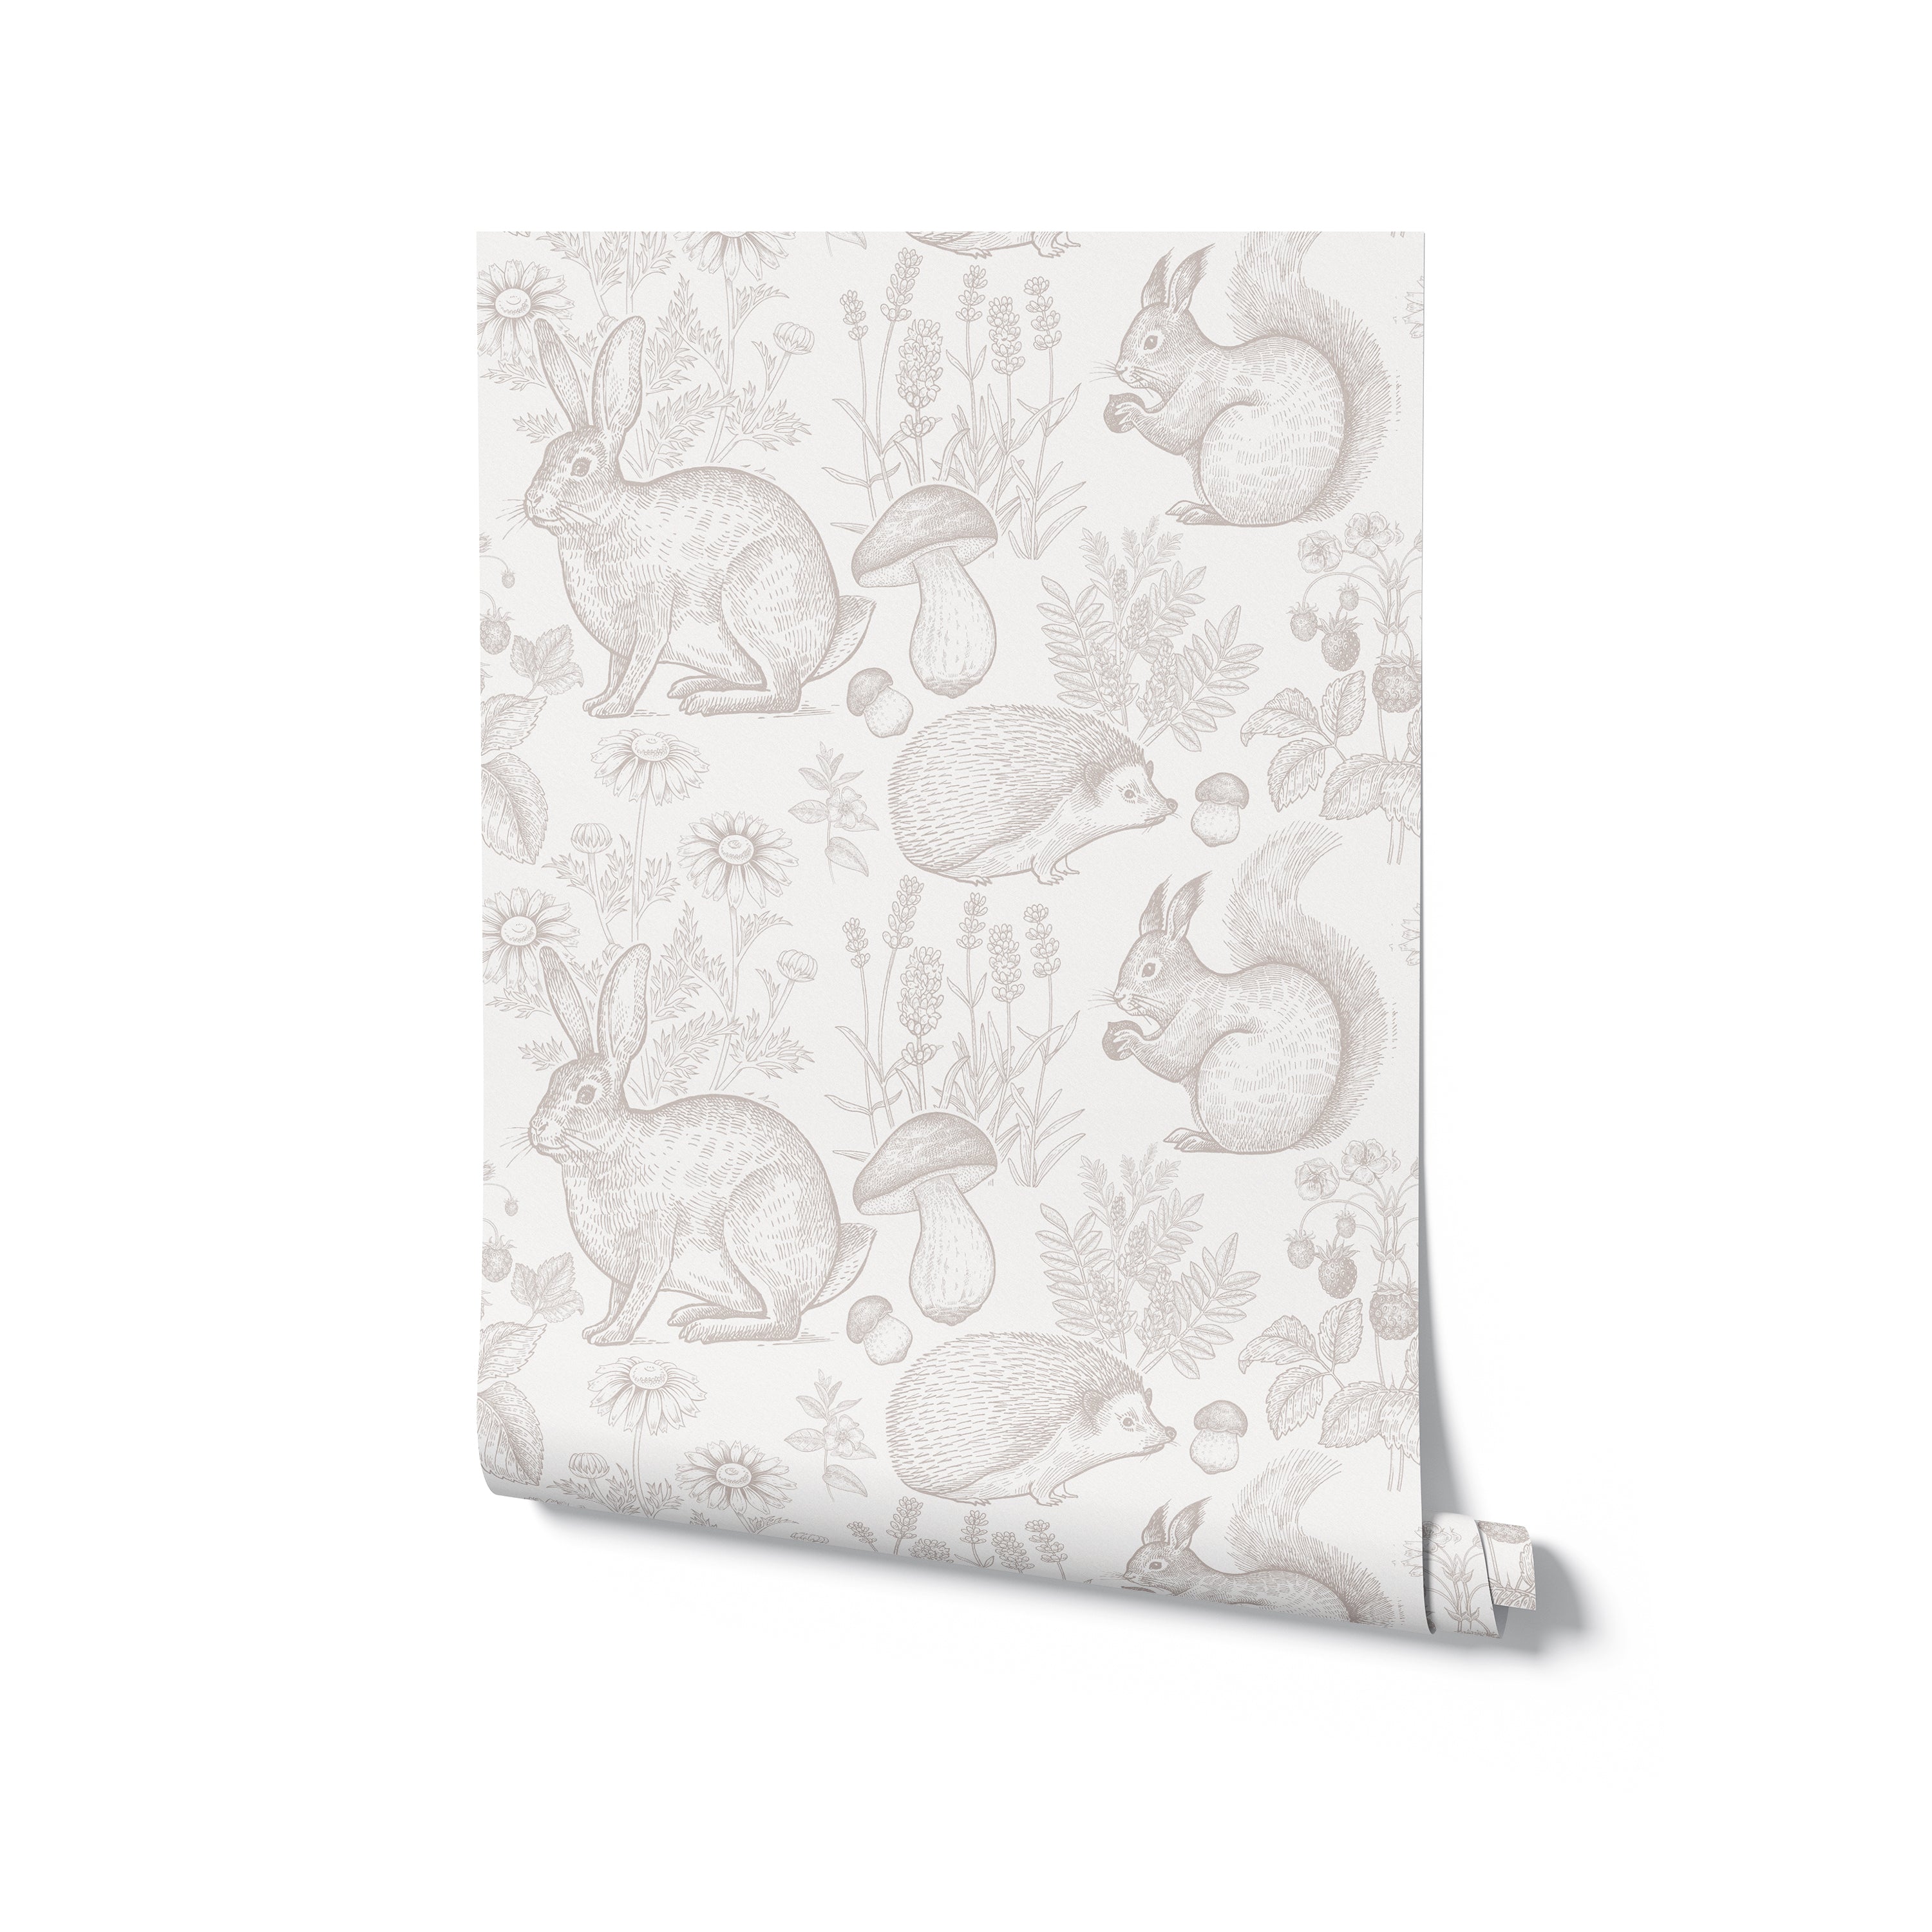 A whimsical roll of the "Woodland Creatures Wallpaper - Beige" is partially unrolled, highlighting the repeating pattern of forest fauna and flora. The neutral beige tones of the wallpaper offer versatility, making it suitable for a variety of room decors.